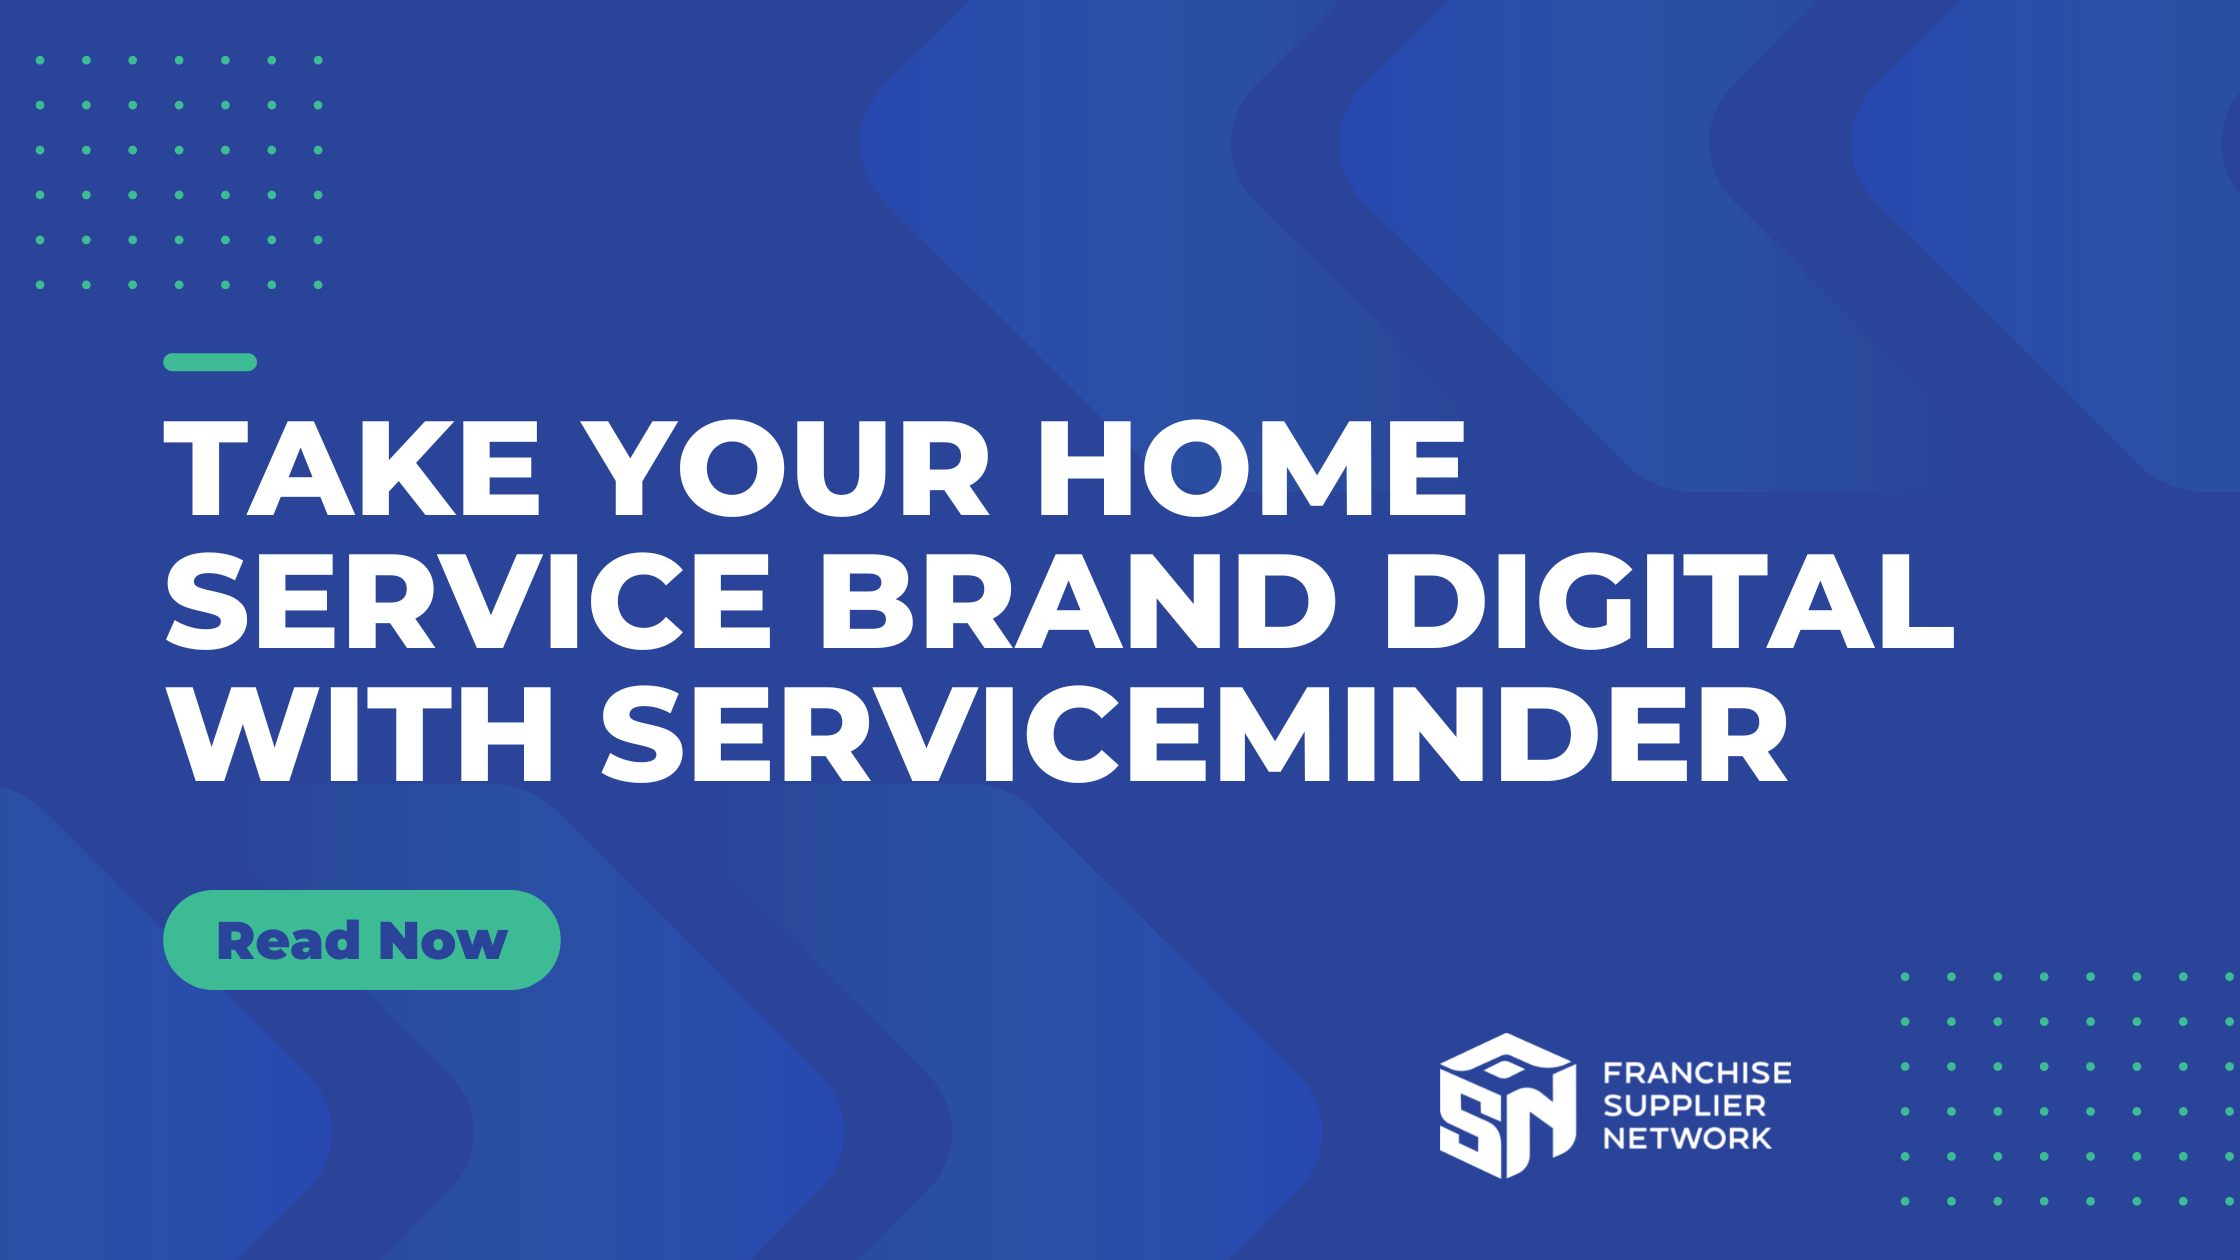 Why Your Home Services Brand Should Go Digital